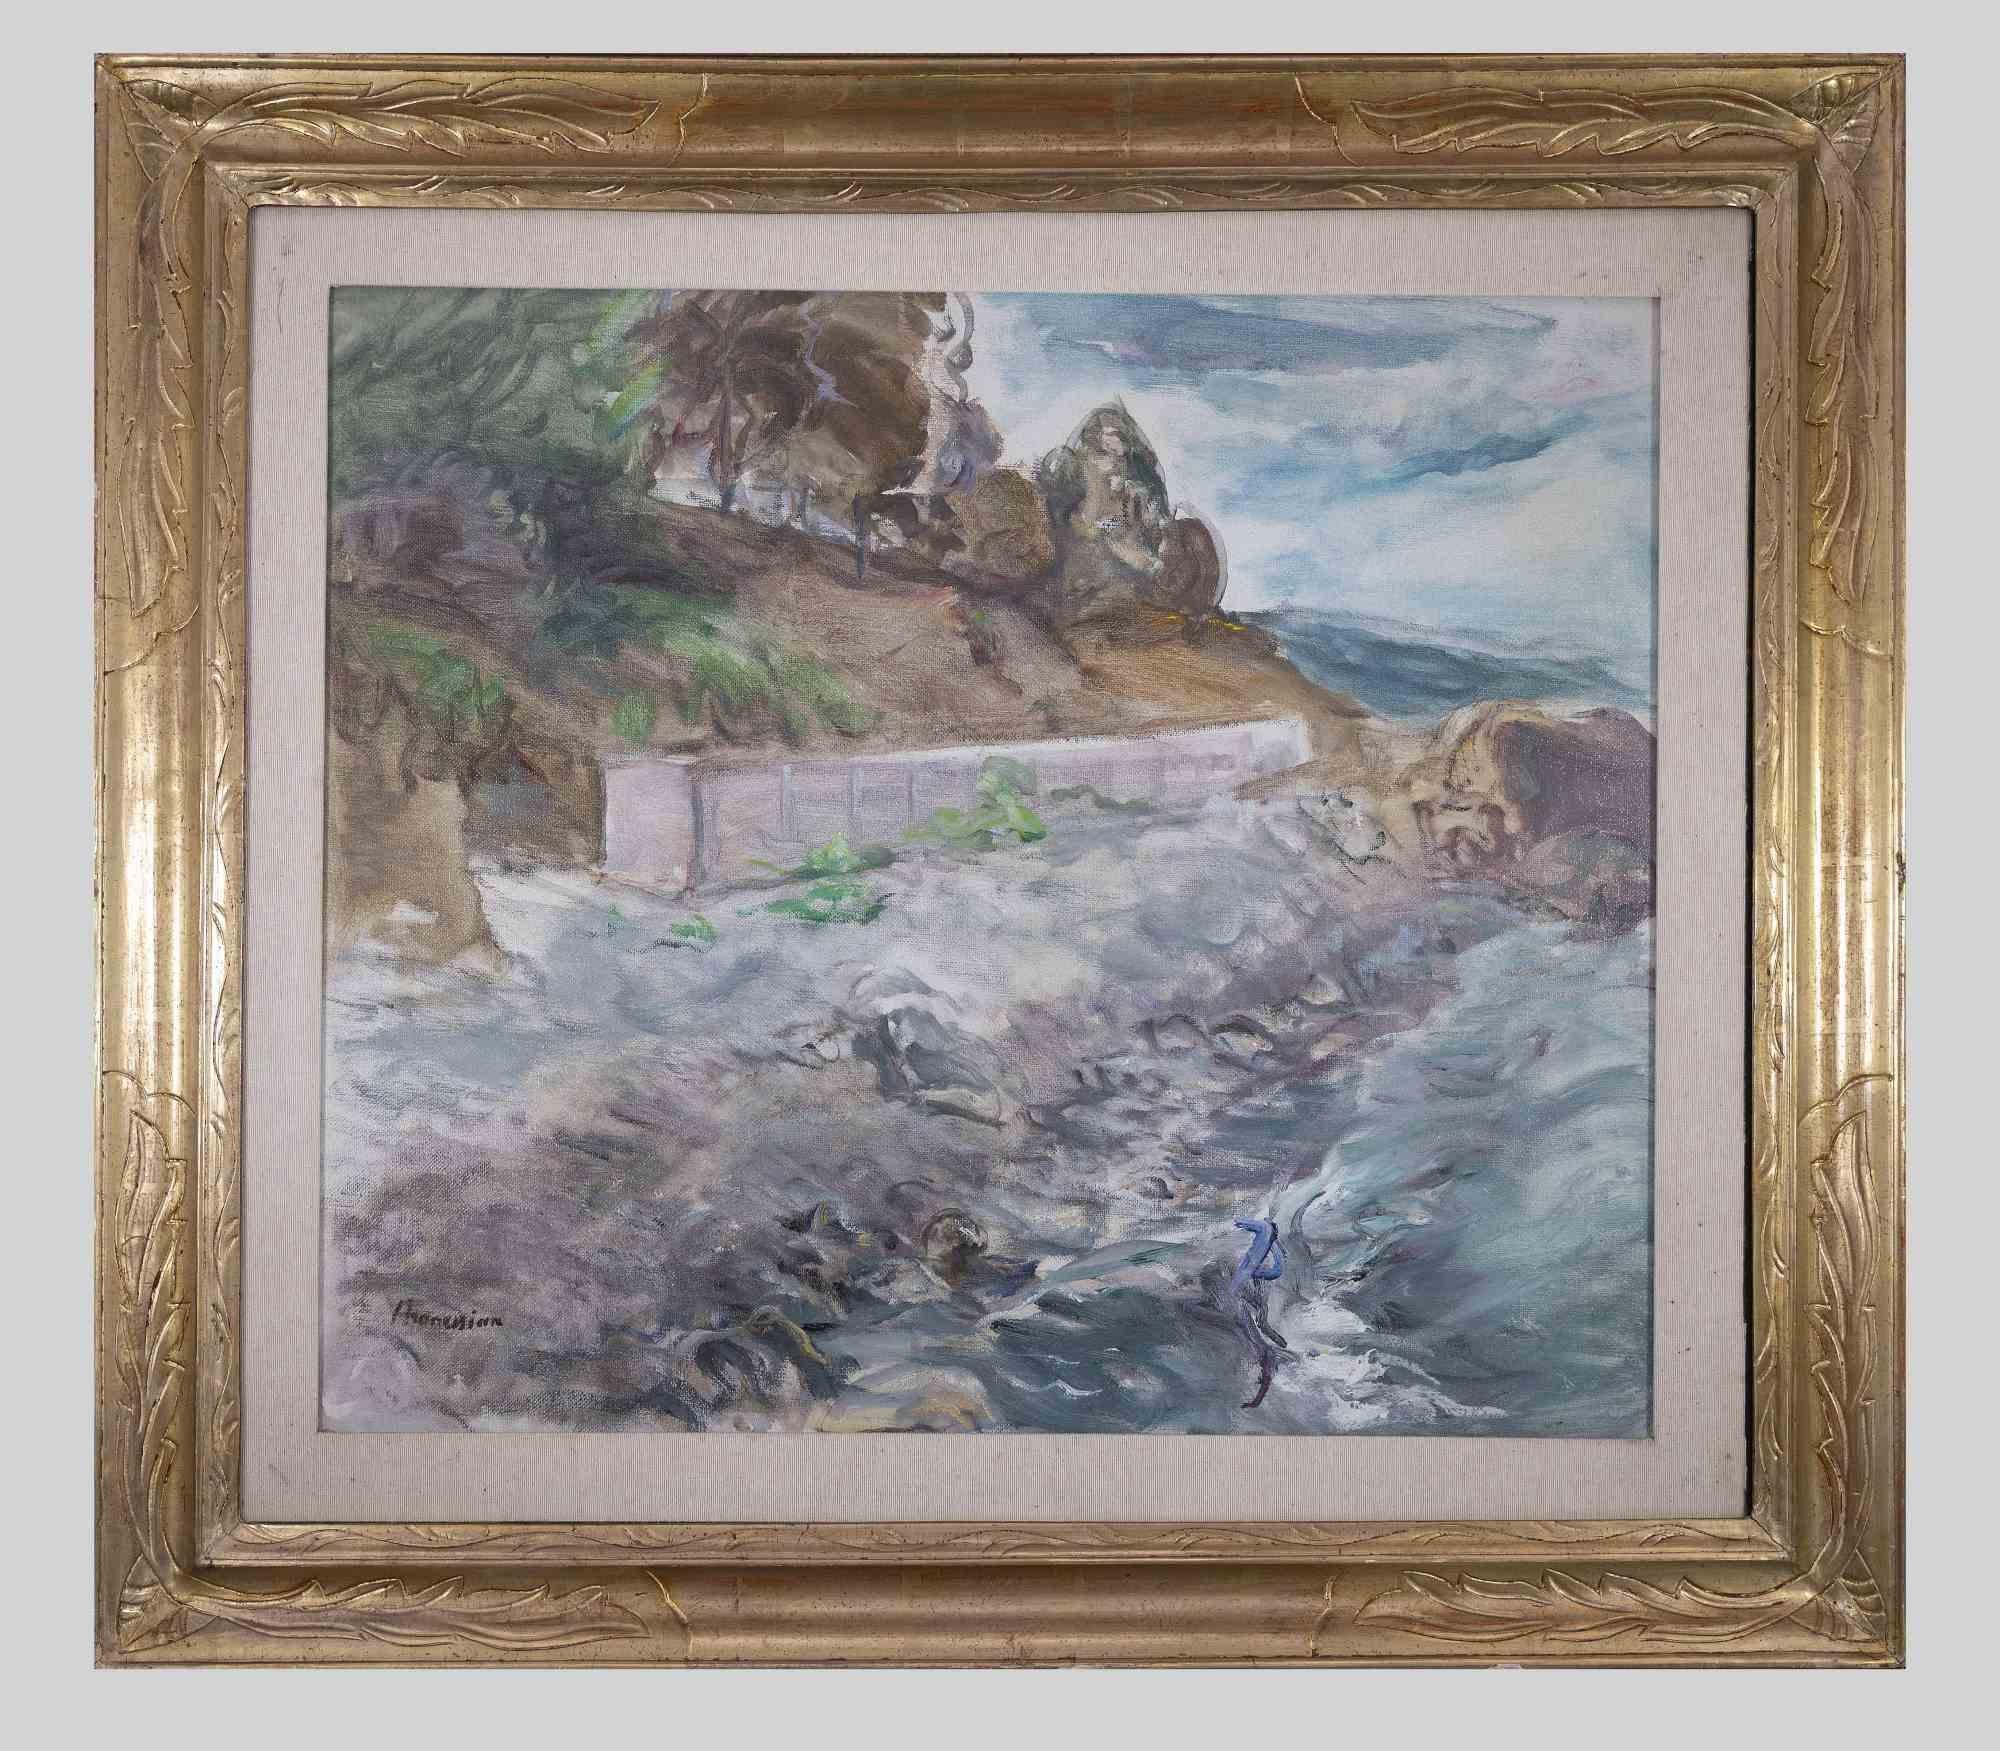 Seascape - Oil on Canvas by Alfonso Avanessian - 1990s